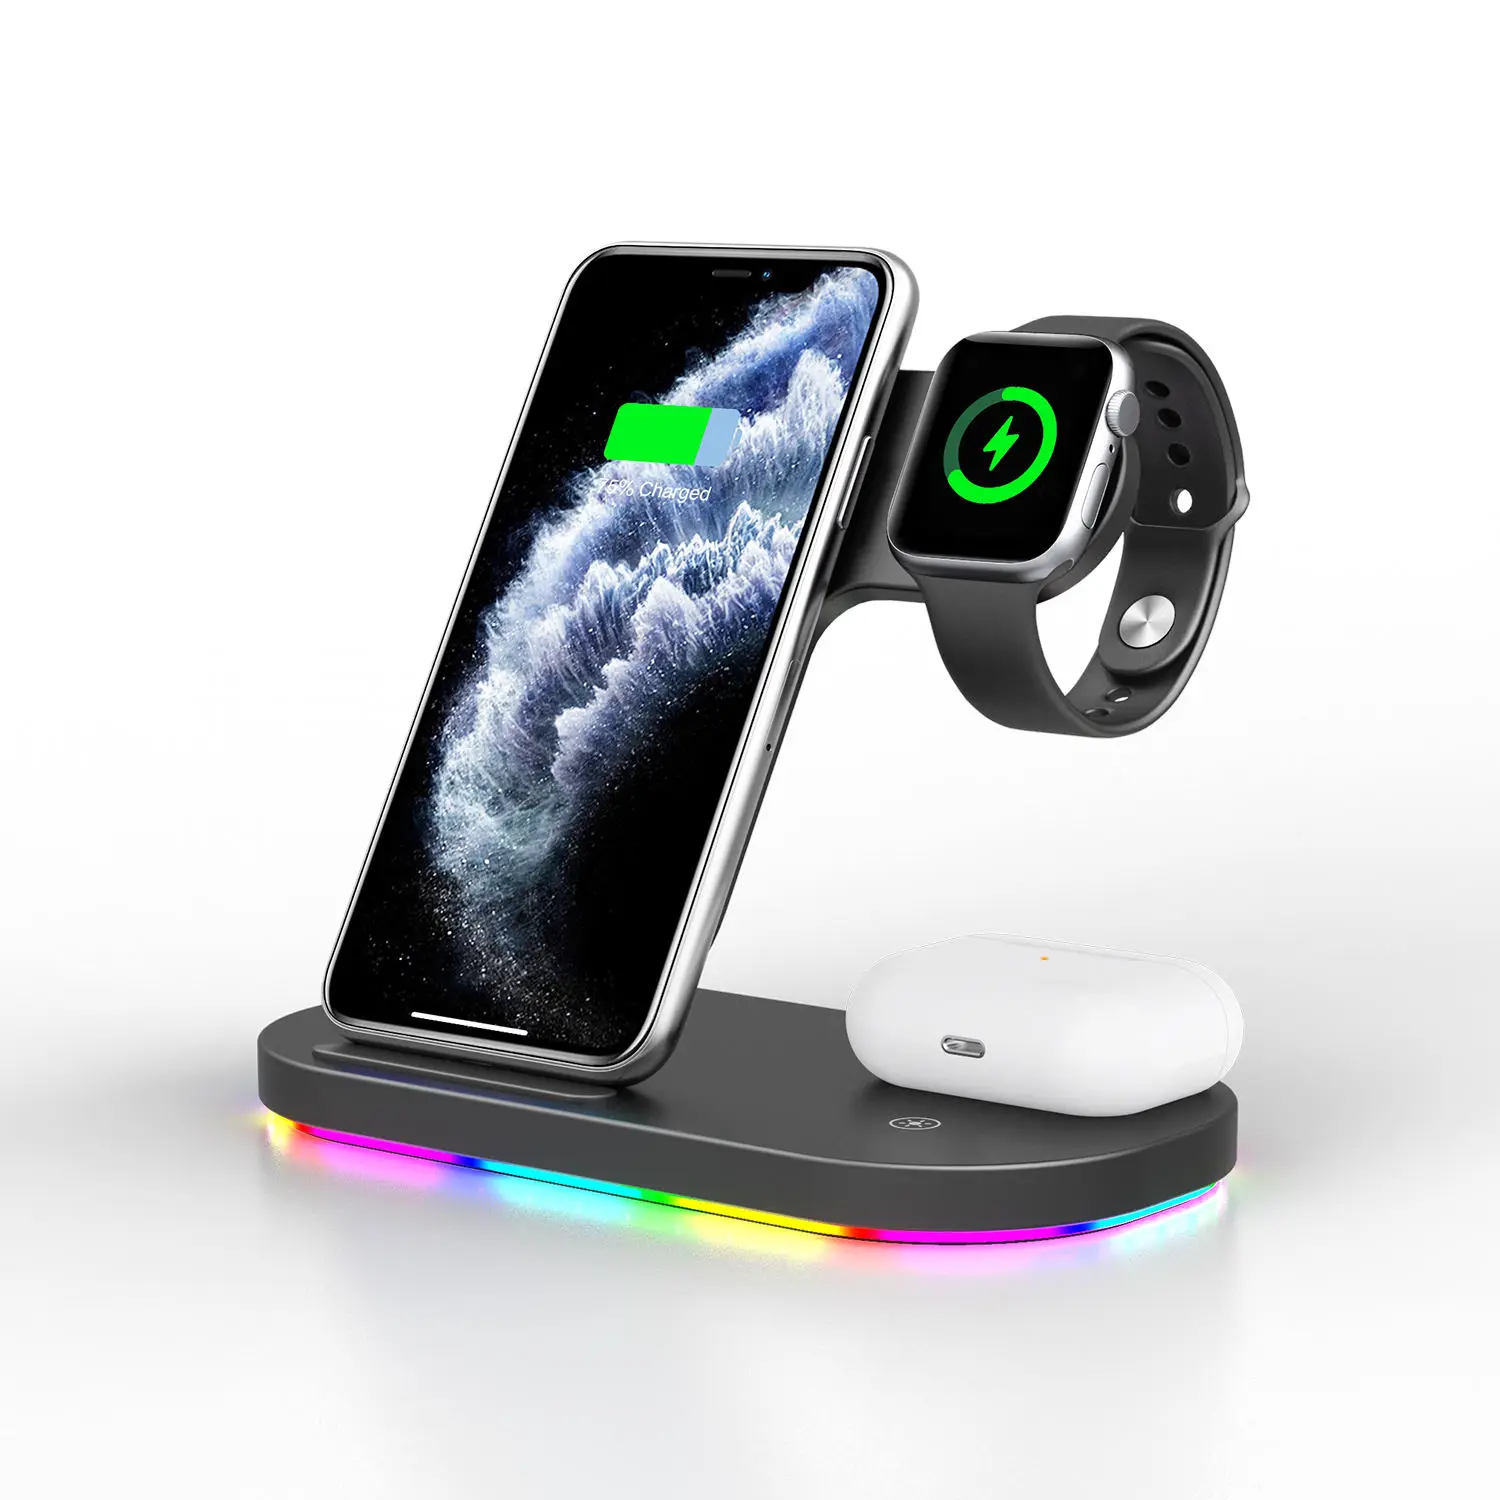 3 in 1 wireless charging station Qi wireless charger